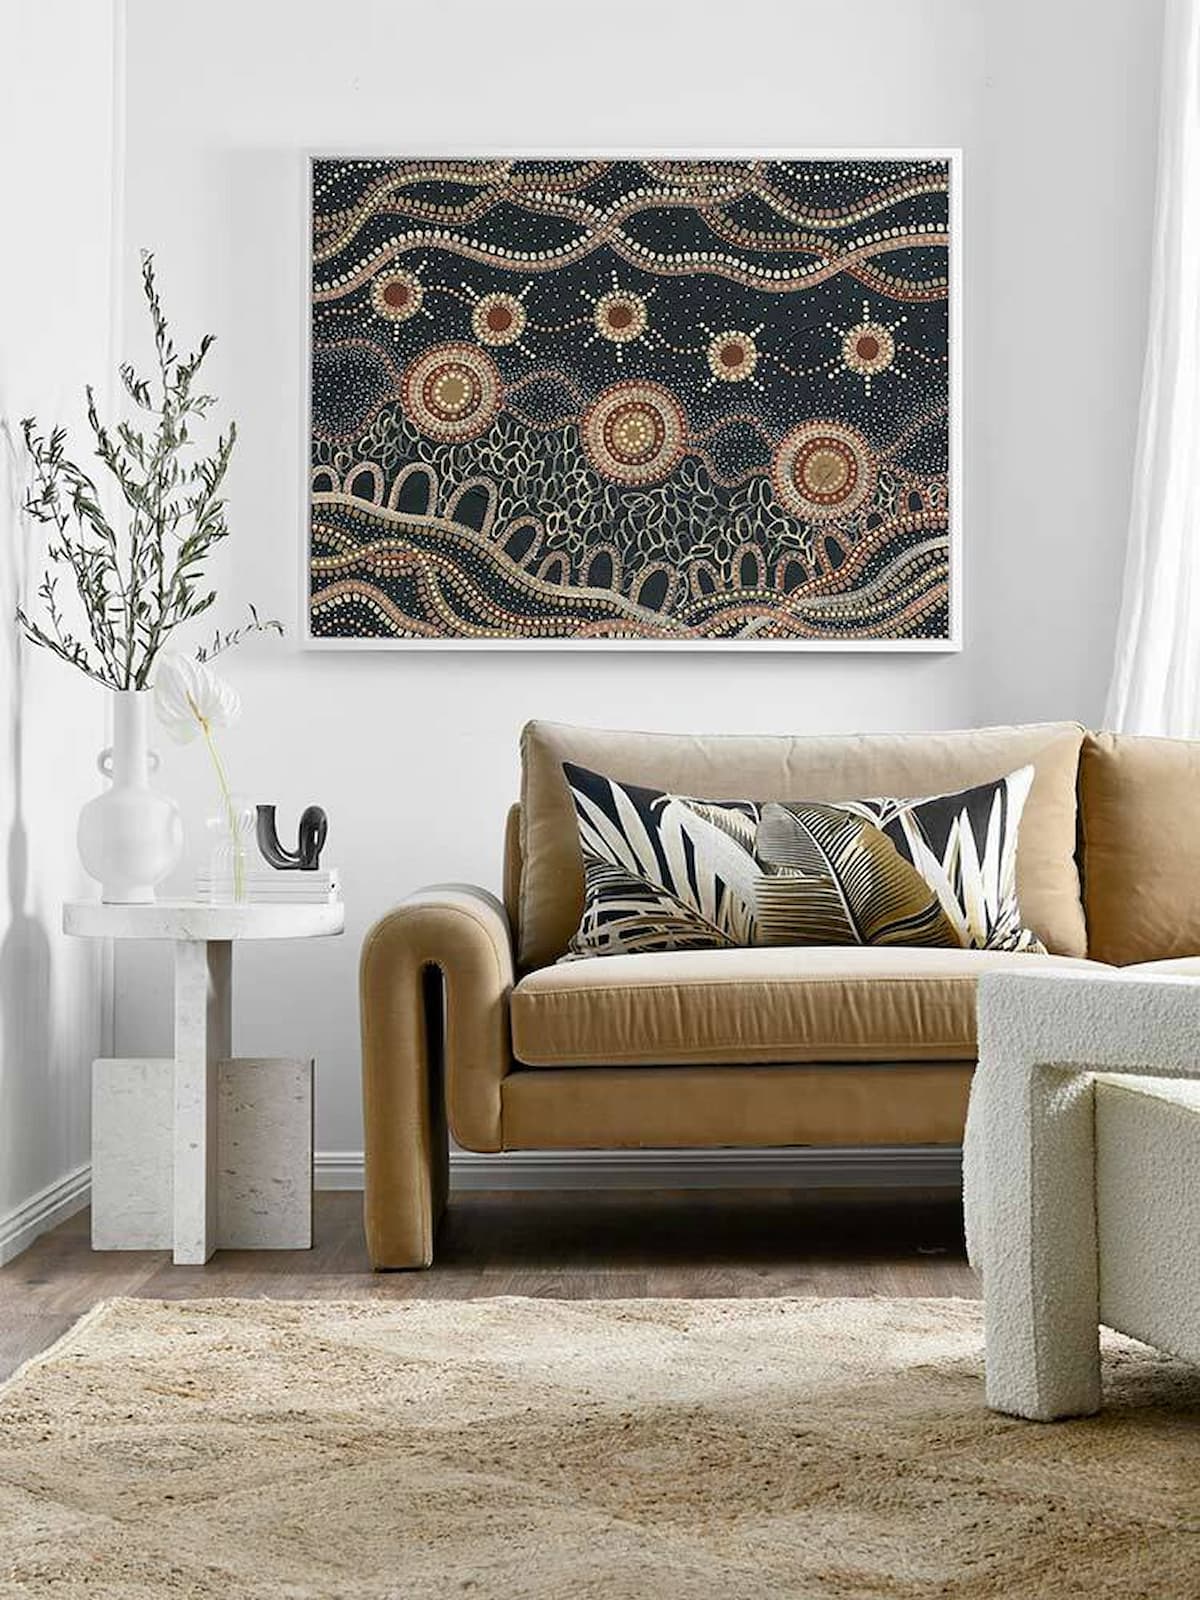 While wall art print canvas is an eye-catching